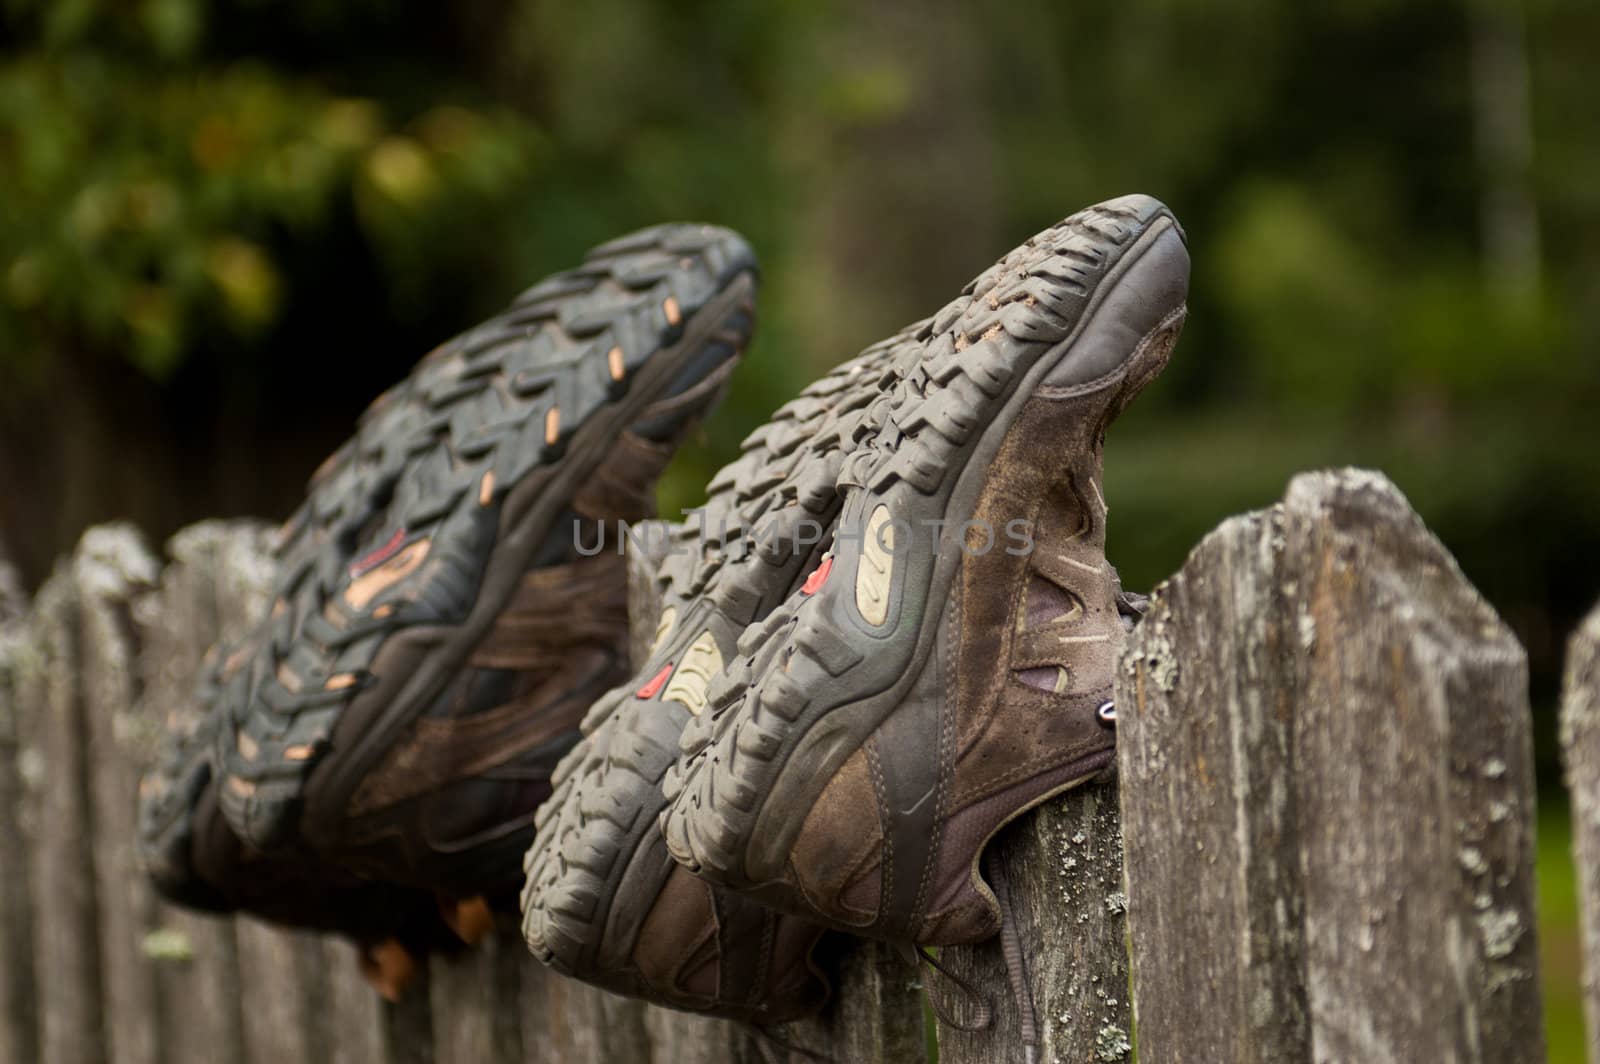 Worn hiking shoes on an old fence







Hiking shoes on a fence